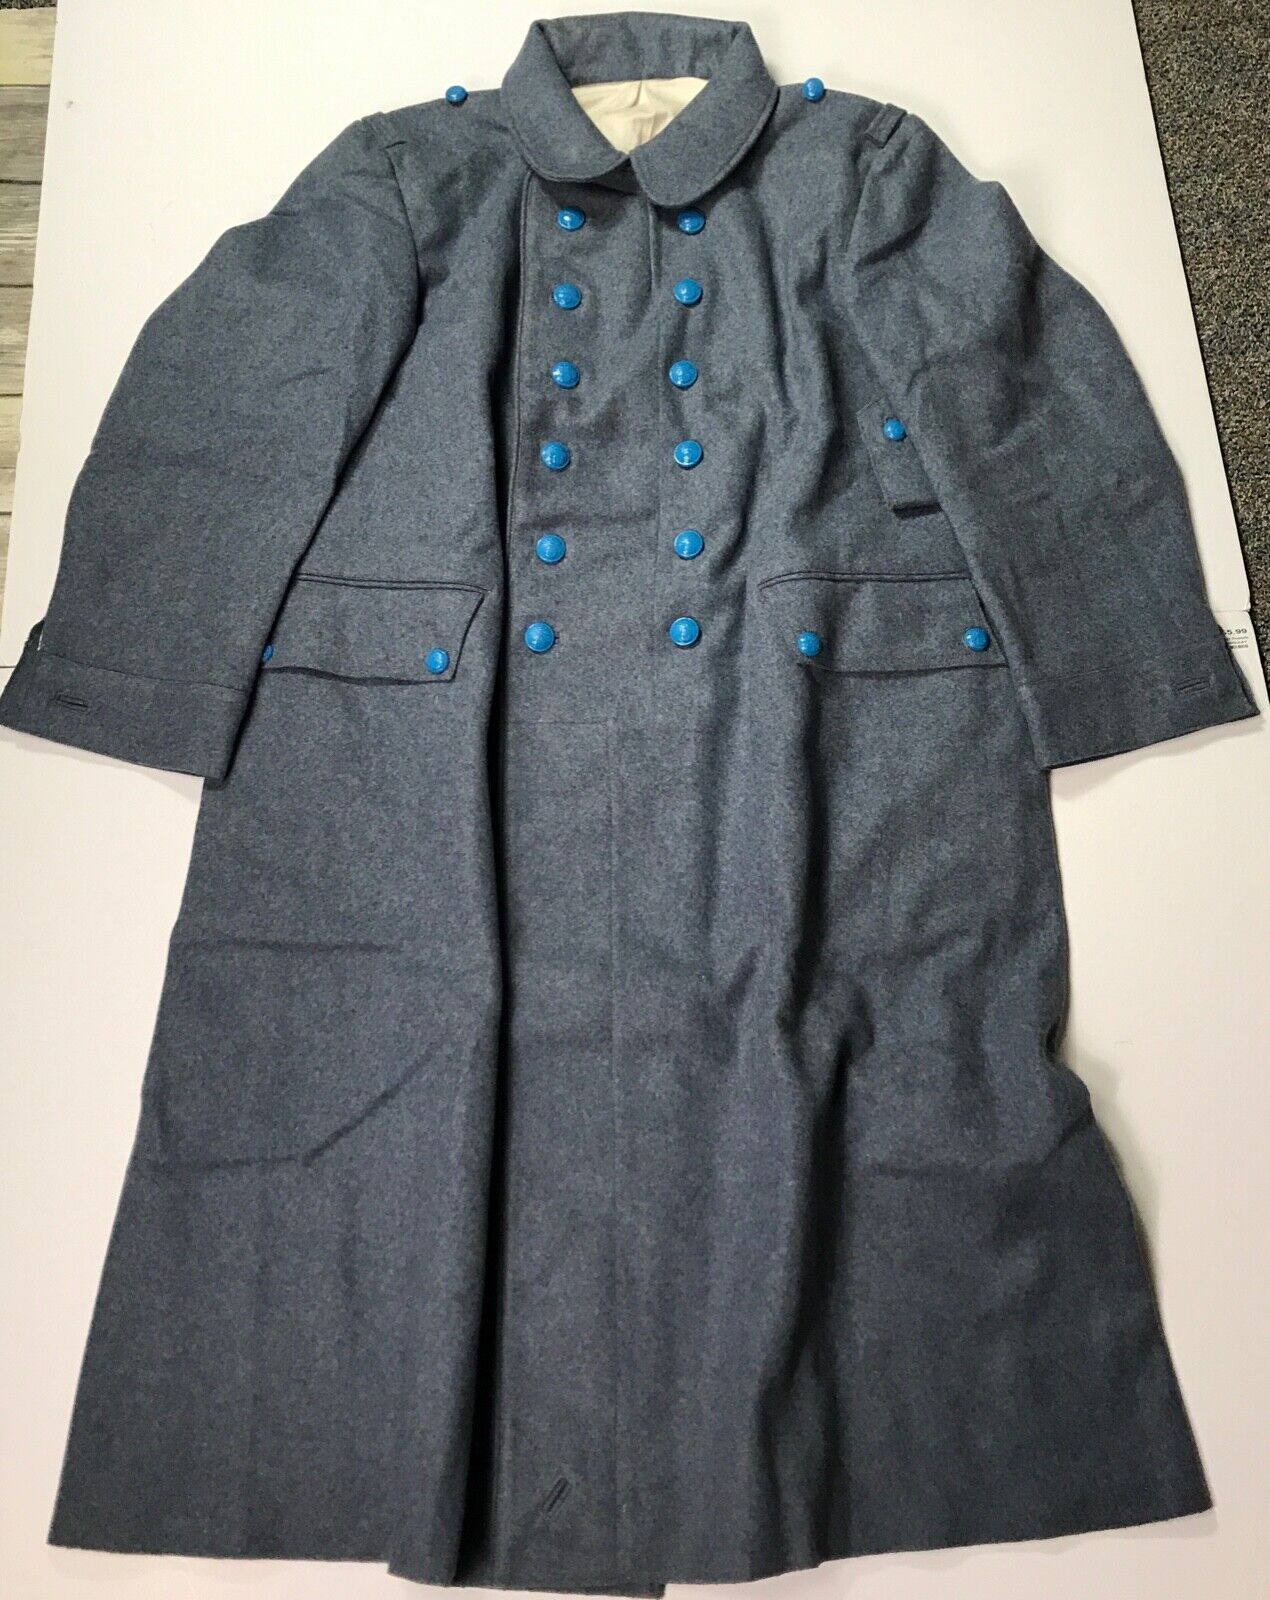  WWI FRENCH M1915 HORIZON BLUE WOOL WINTER OVERCOAT GREATCOAT- SIZE 4 (46-48R)